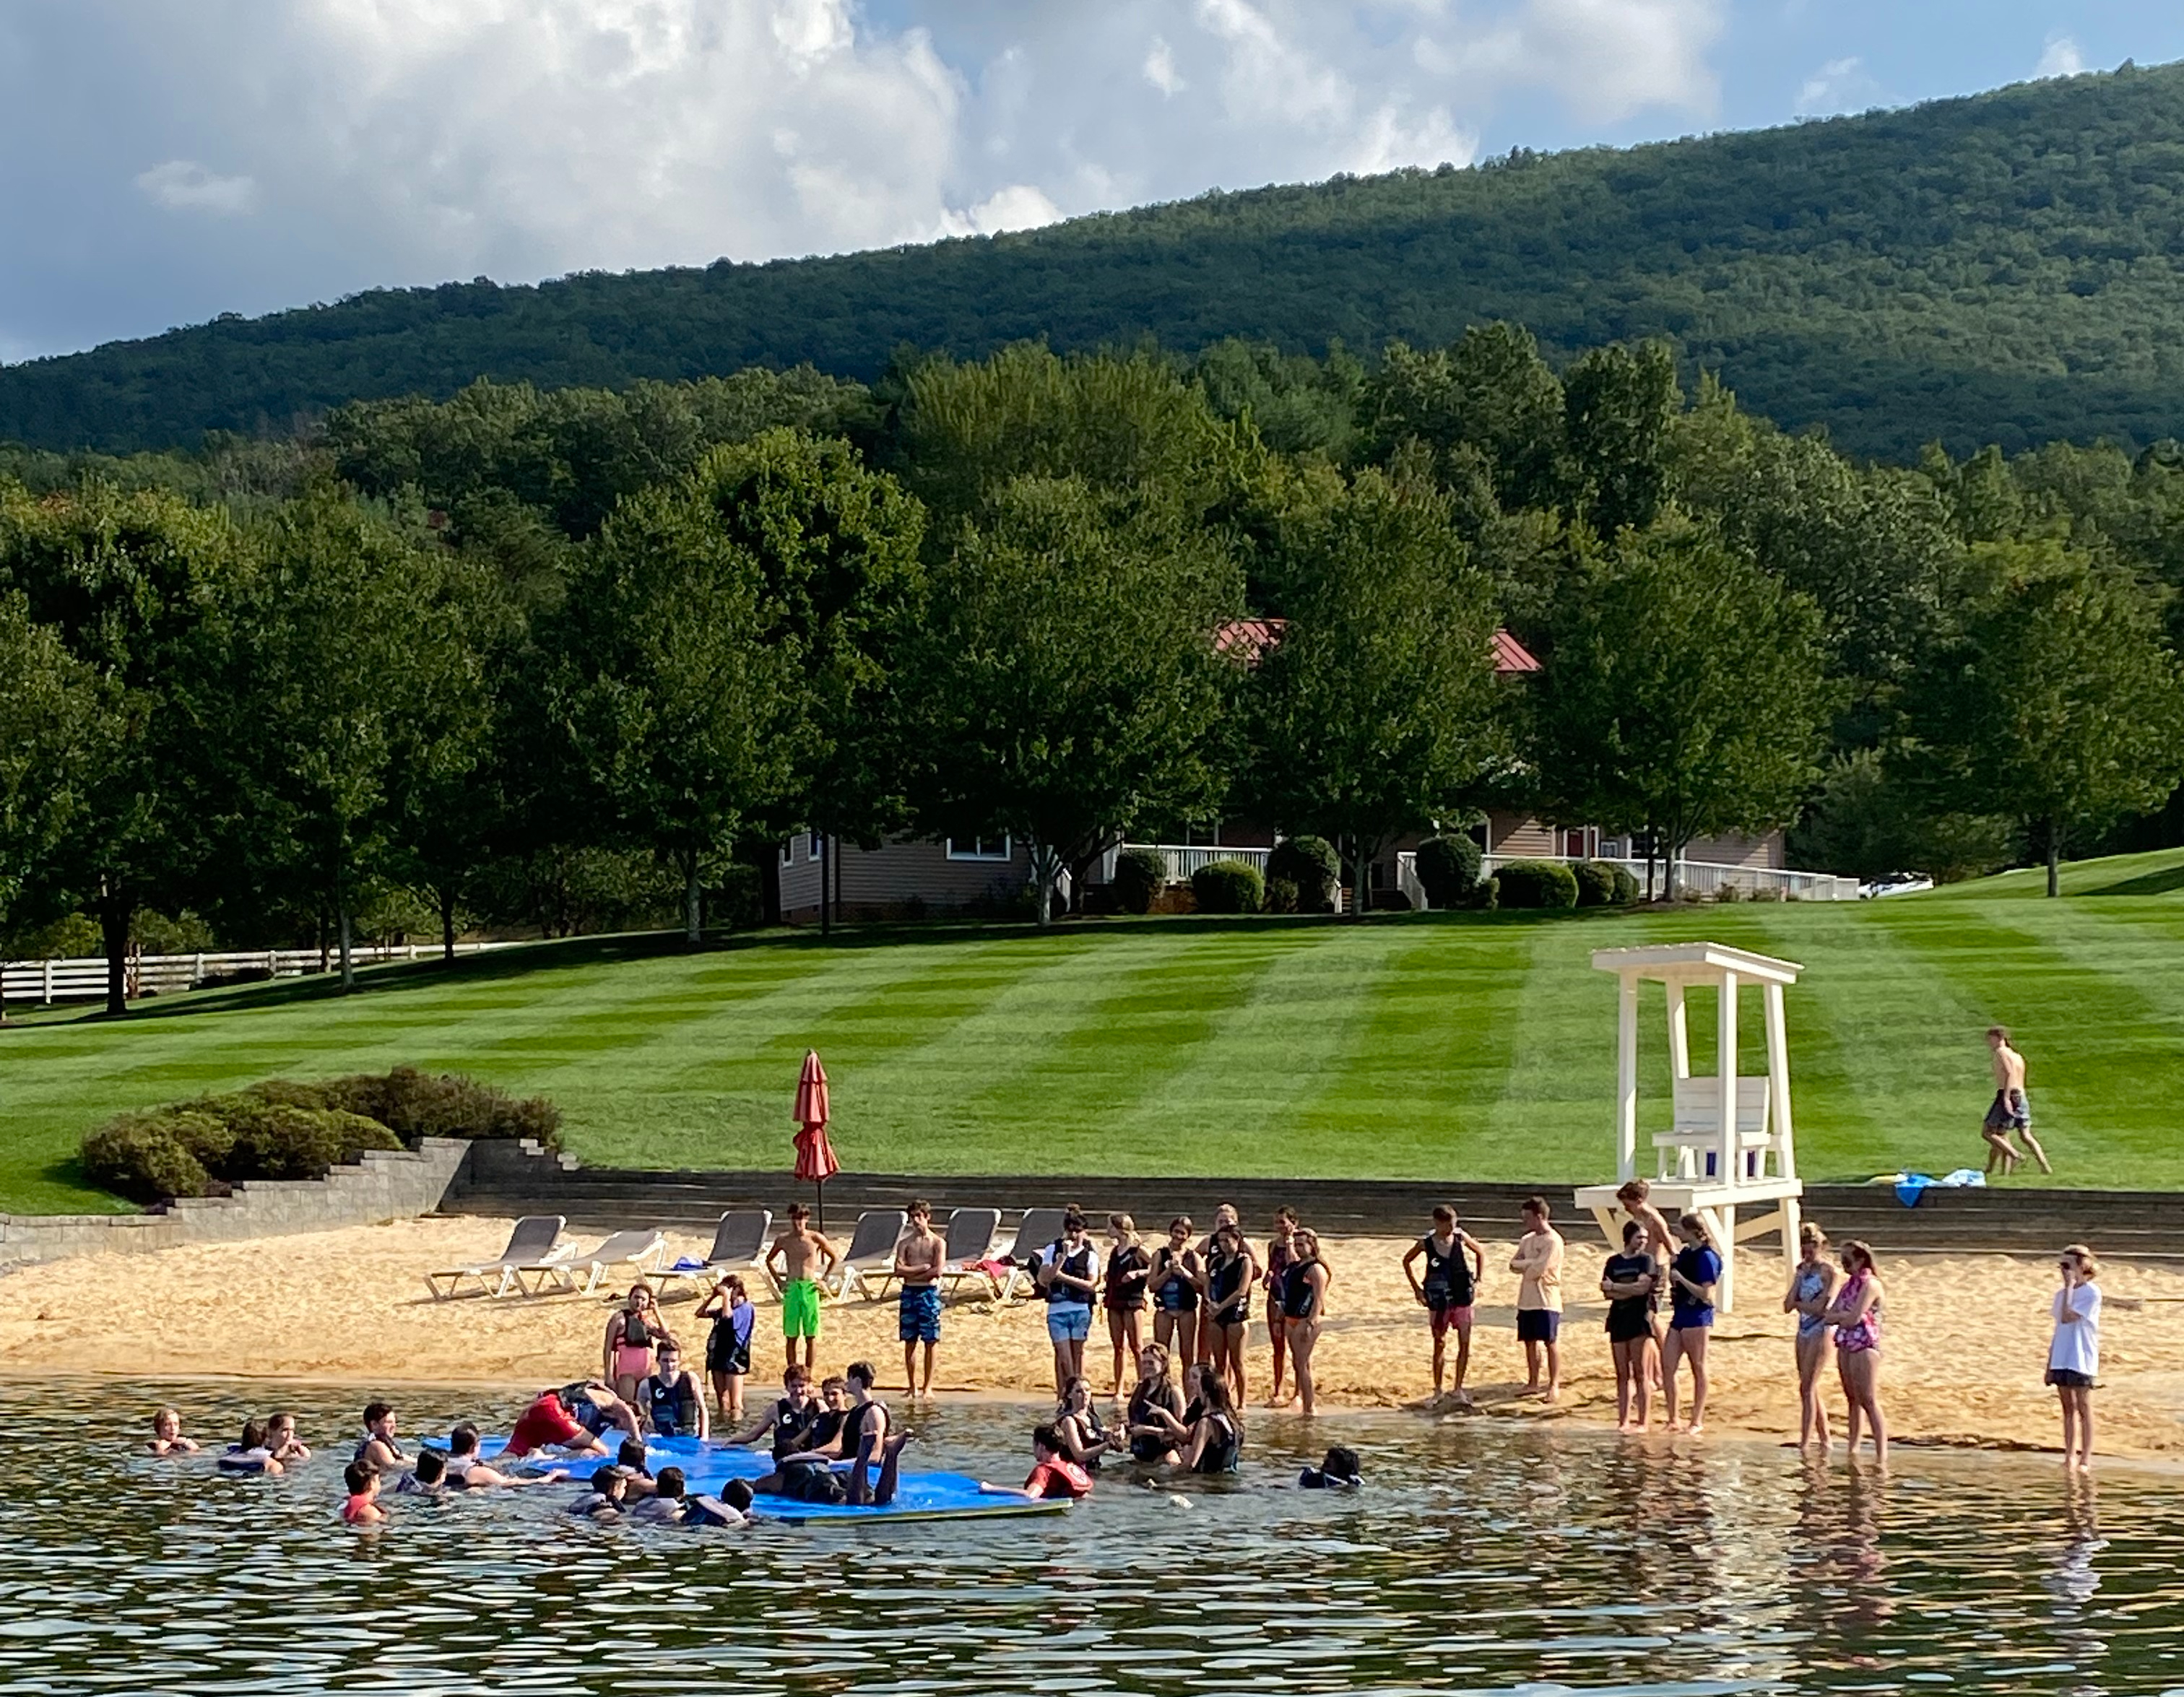 Upper School students relax at the Young Life Center in Rockbridge, VA during the annual retreat.